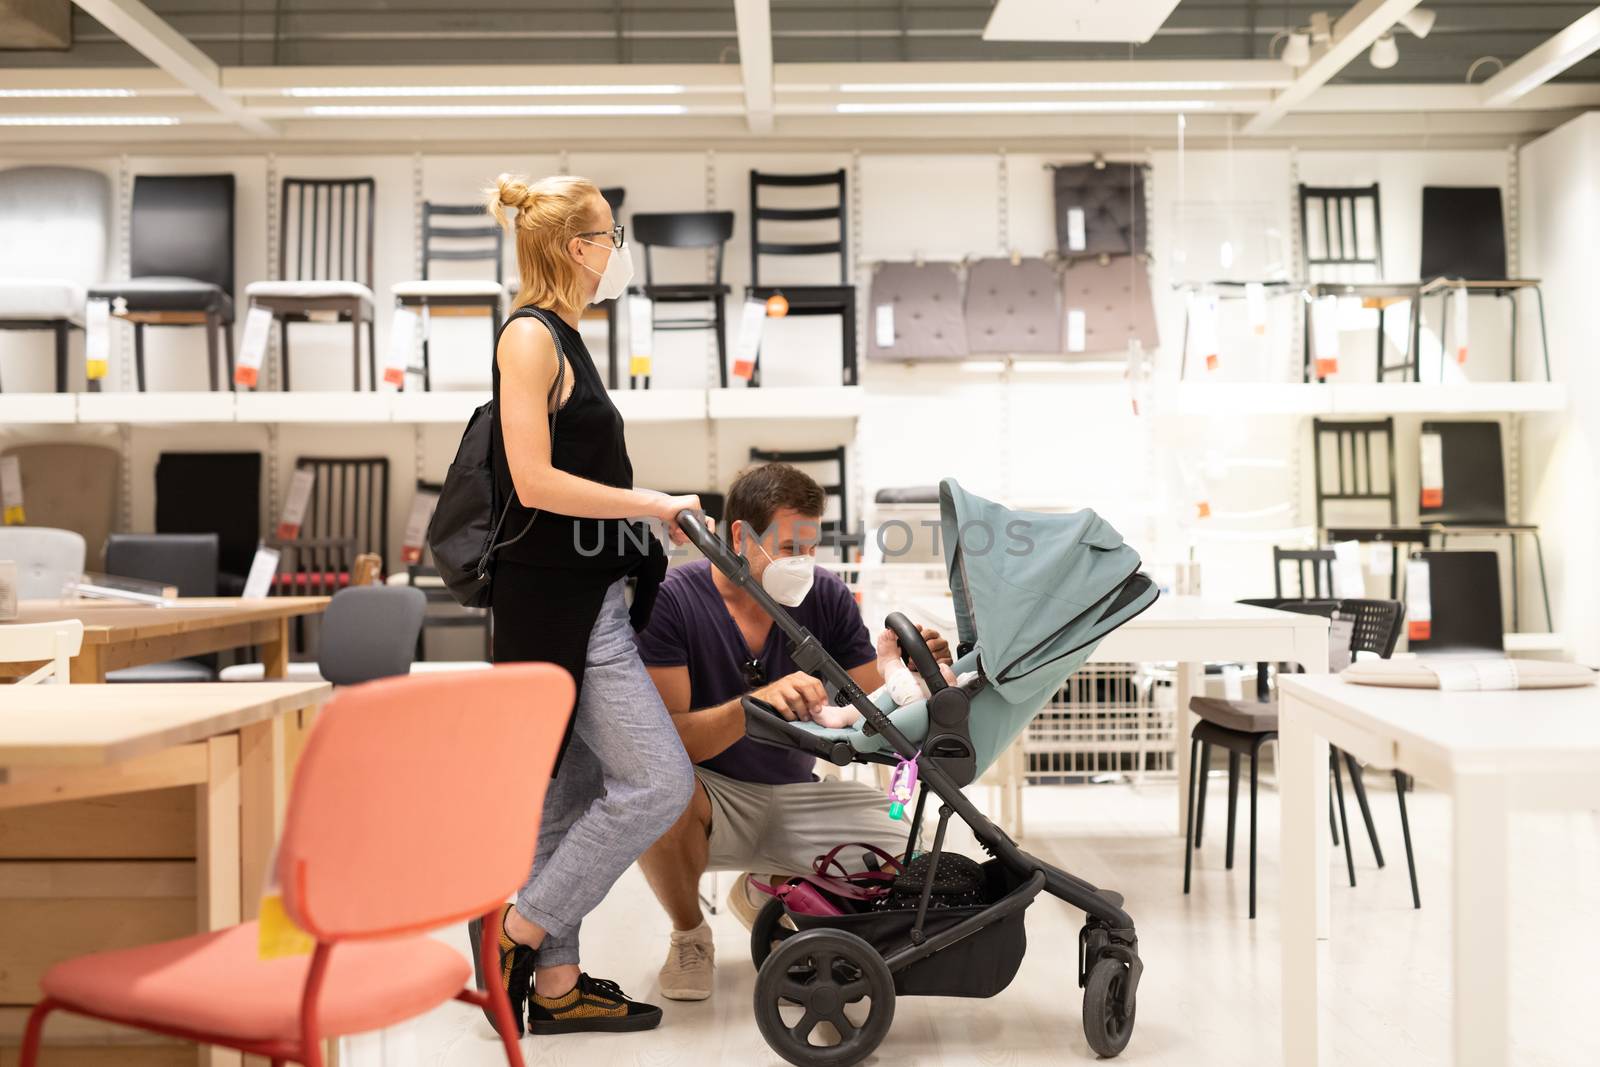 Young couple with newborn in stroller shopping at retail furniture and home accessories store wearing protective medical face mask to prevent spreading of corona virus when shops reopen. by kasto